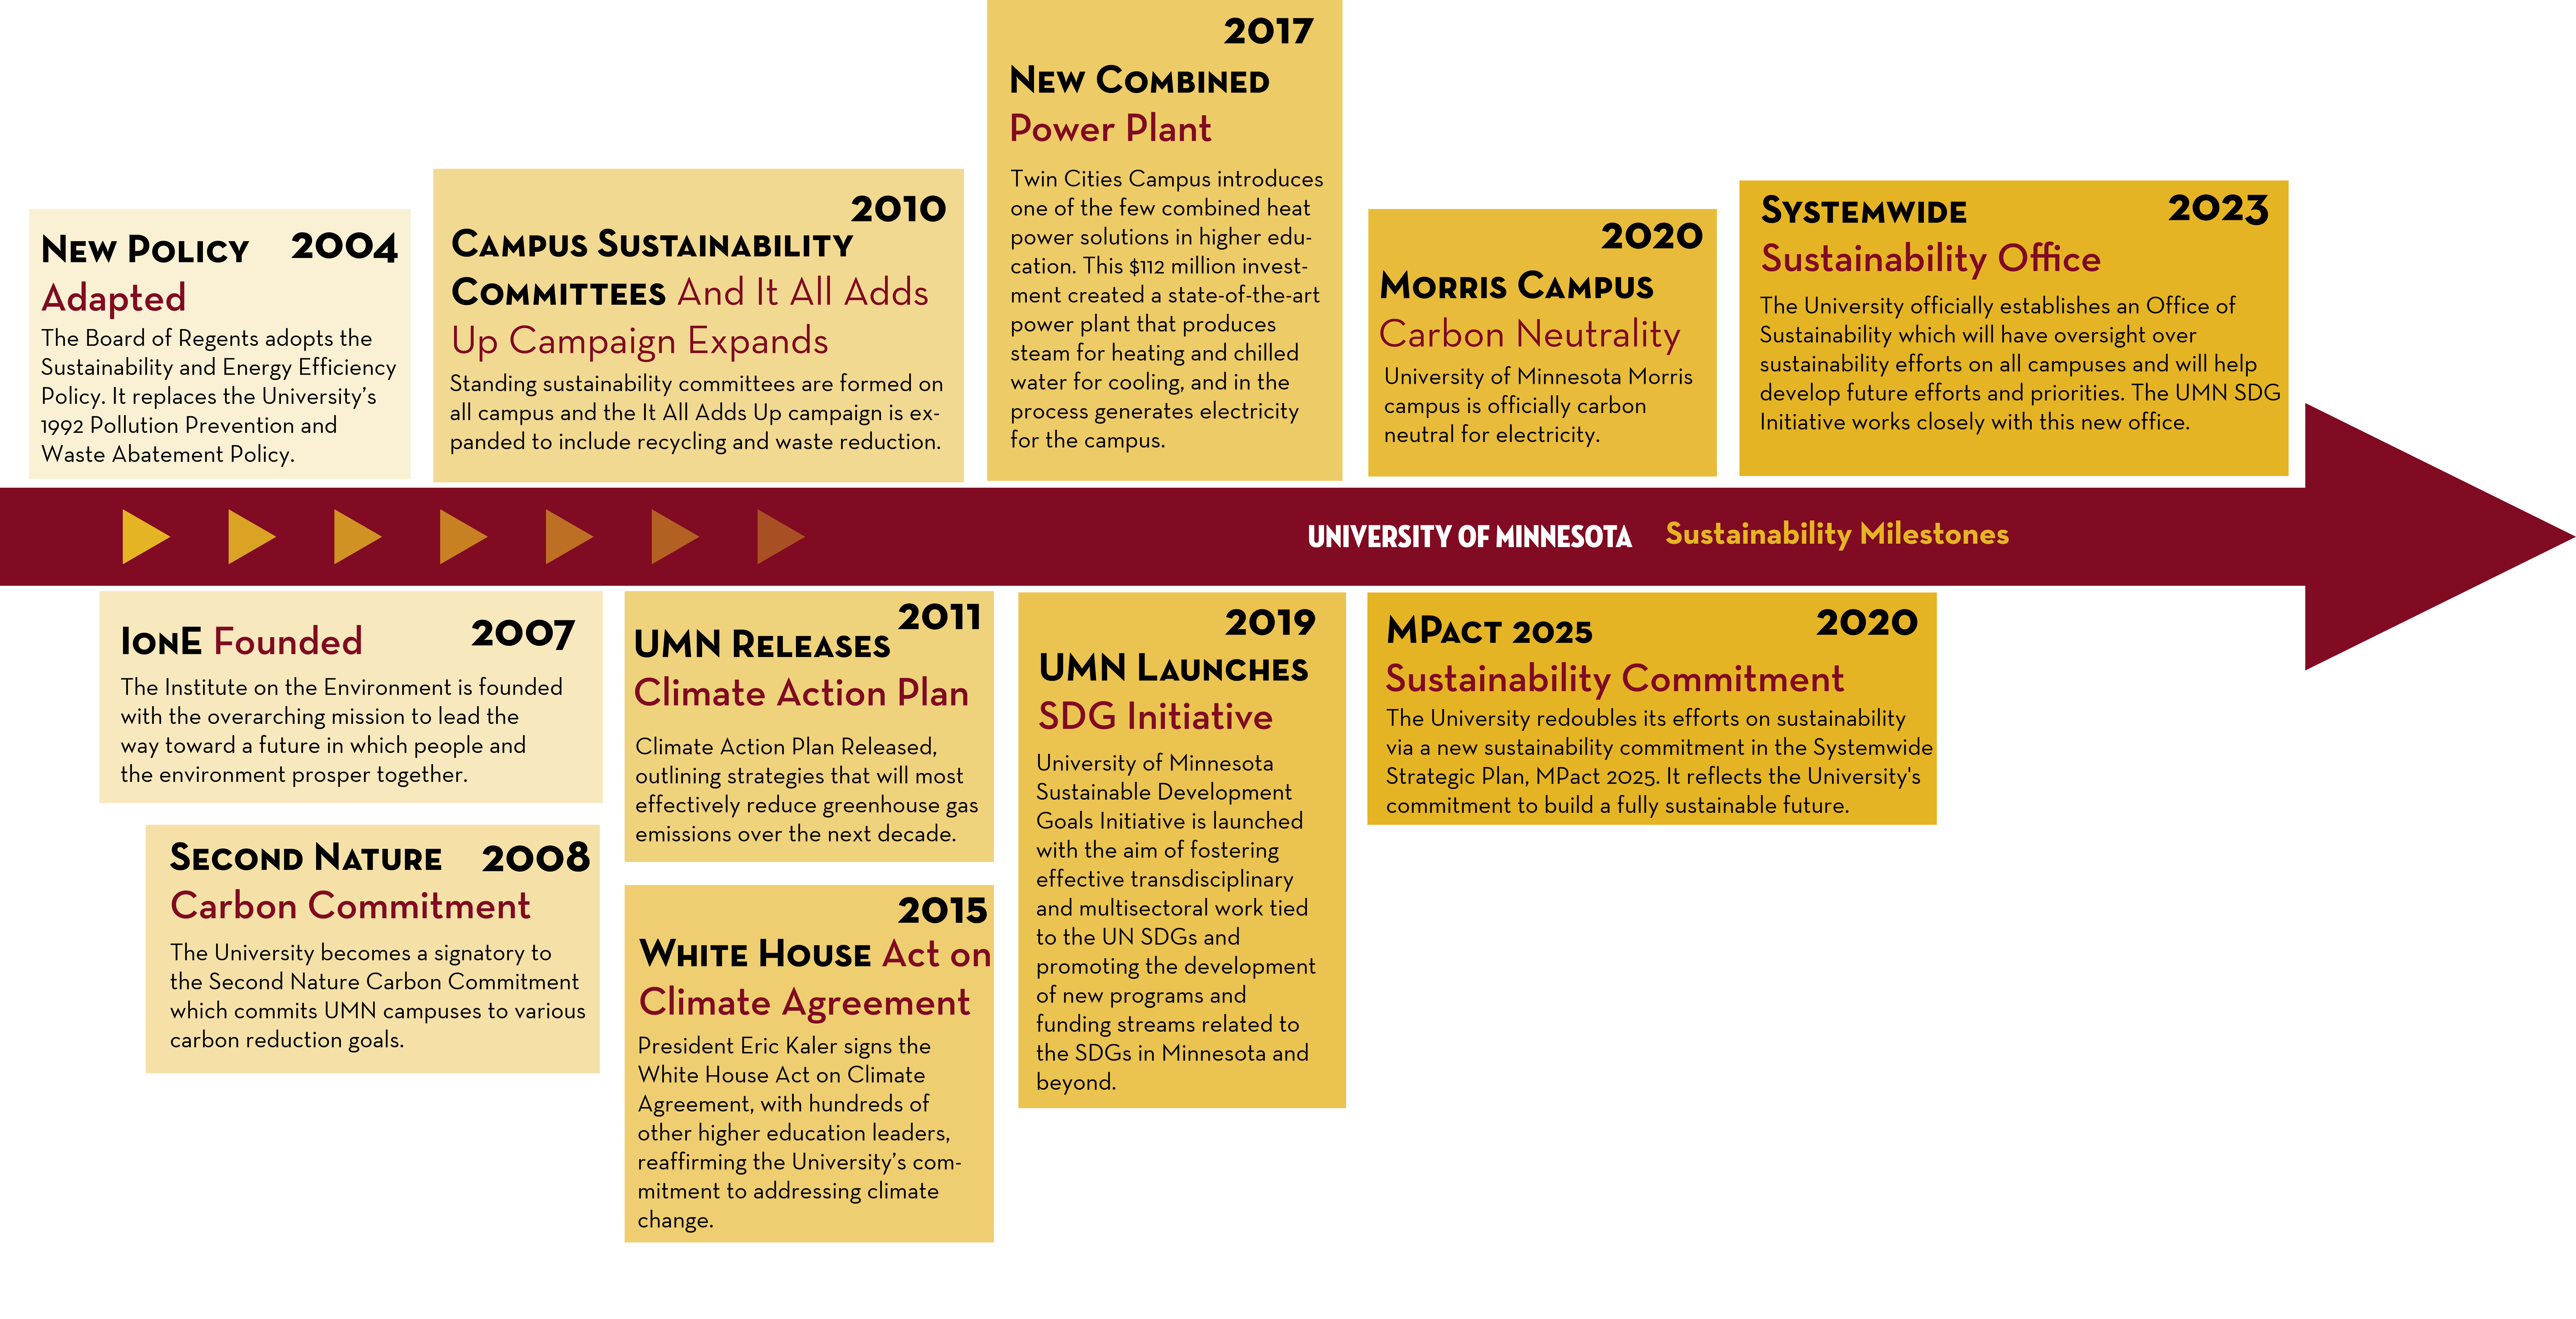 Timeline showing UMN  sustainability milestones from early 2000s until 2023. 